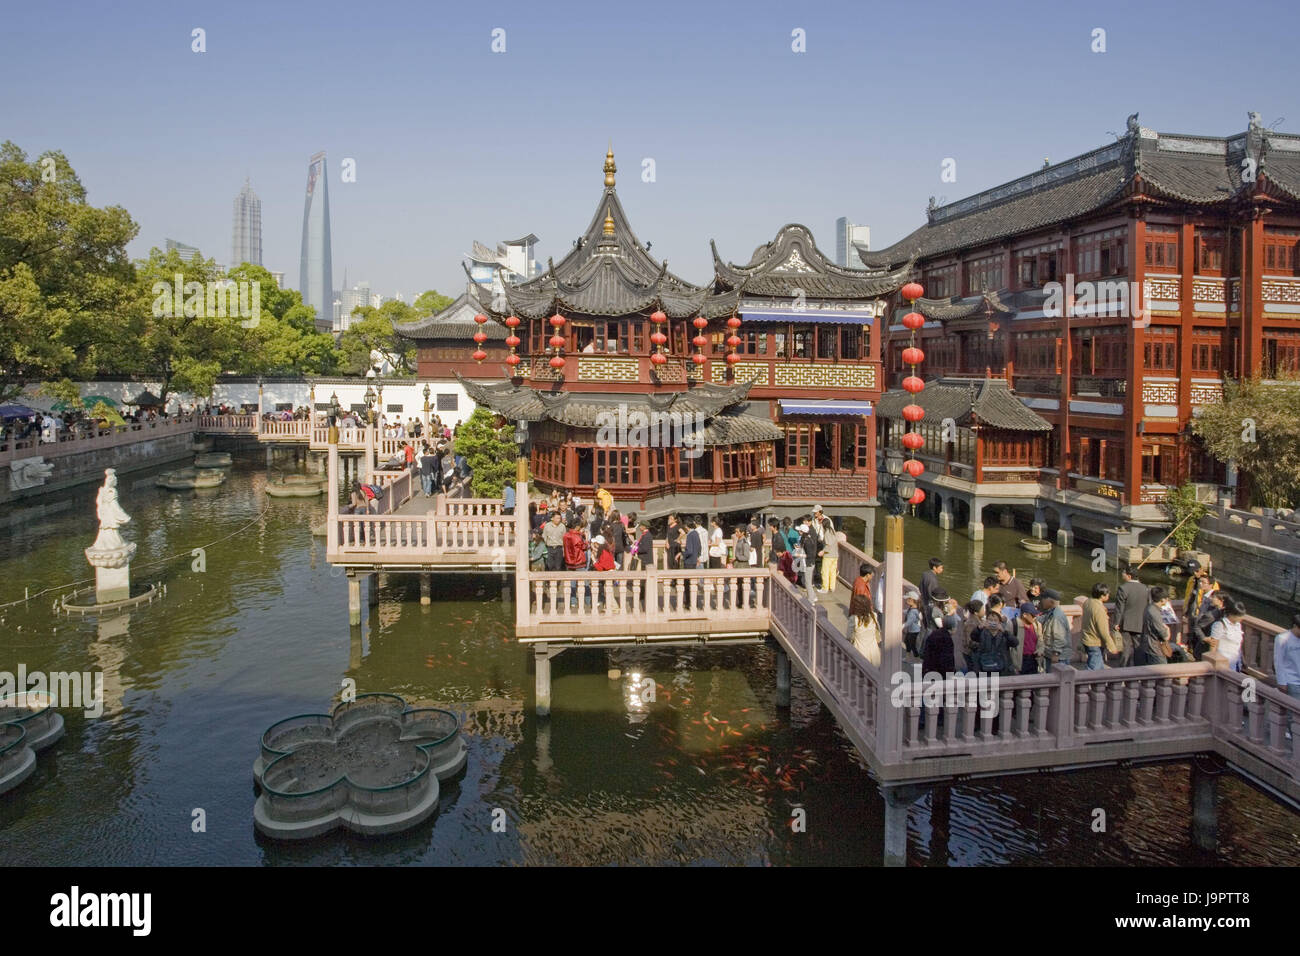 China,Shanghai,Old Town,Yu Yuan Bazaar,Teehaus-im-Herzen-des-Sees,Jiuqu Qiao bridge,tourist,Asia,Eastern Asia,town,city,part of town,Yu Gardens Bazaar,building,houses,architecture,traditionally,in Chinese,people,tourism,place of interest,outside,pond,lake,teahouse,zigzag,nine-flection bridge,Zick Zack bridge,historically, Stock Photo